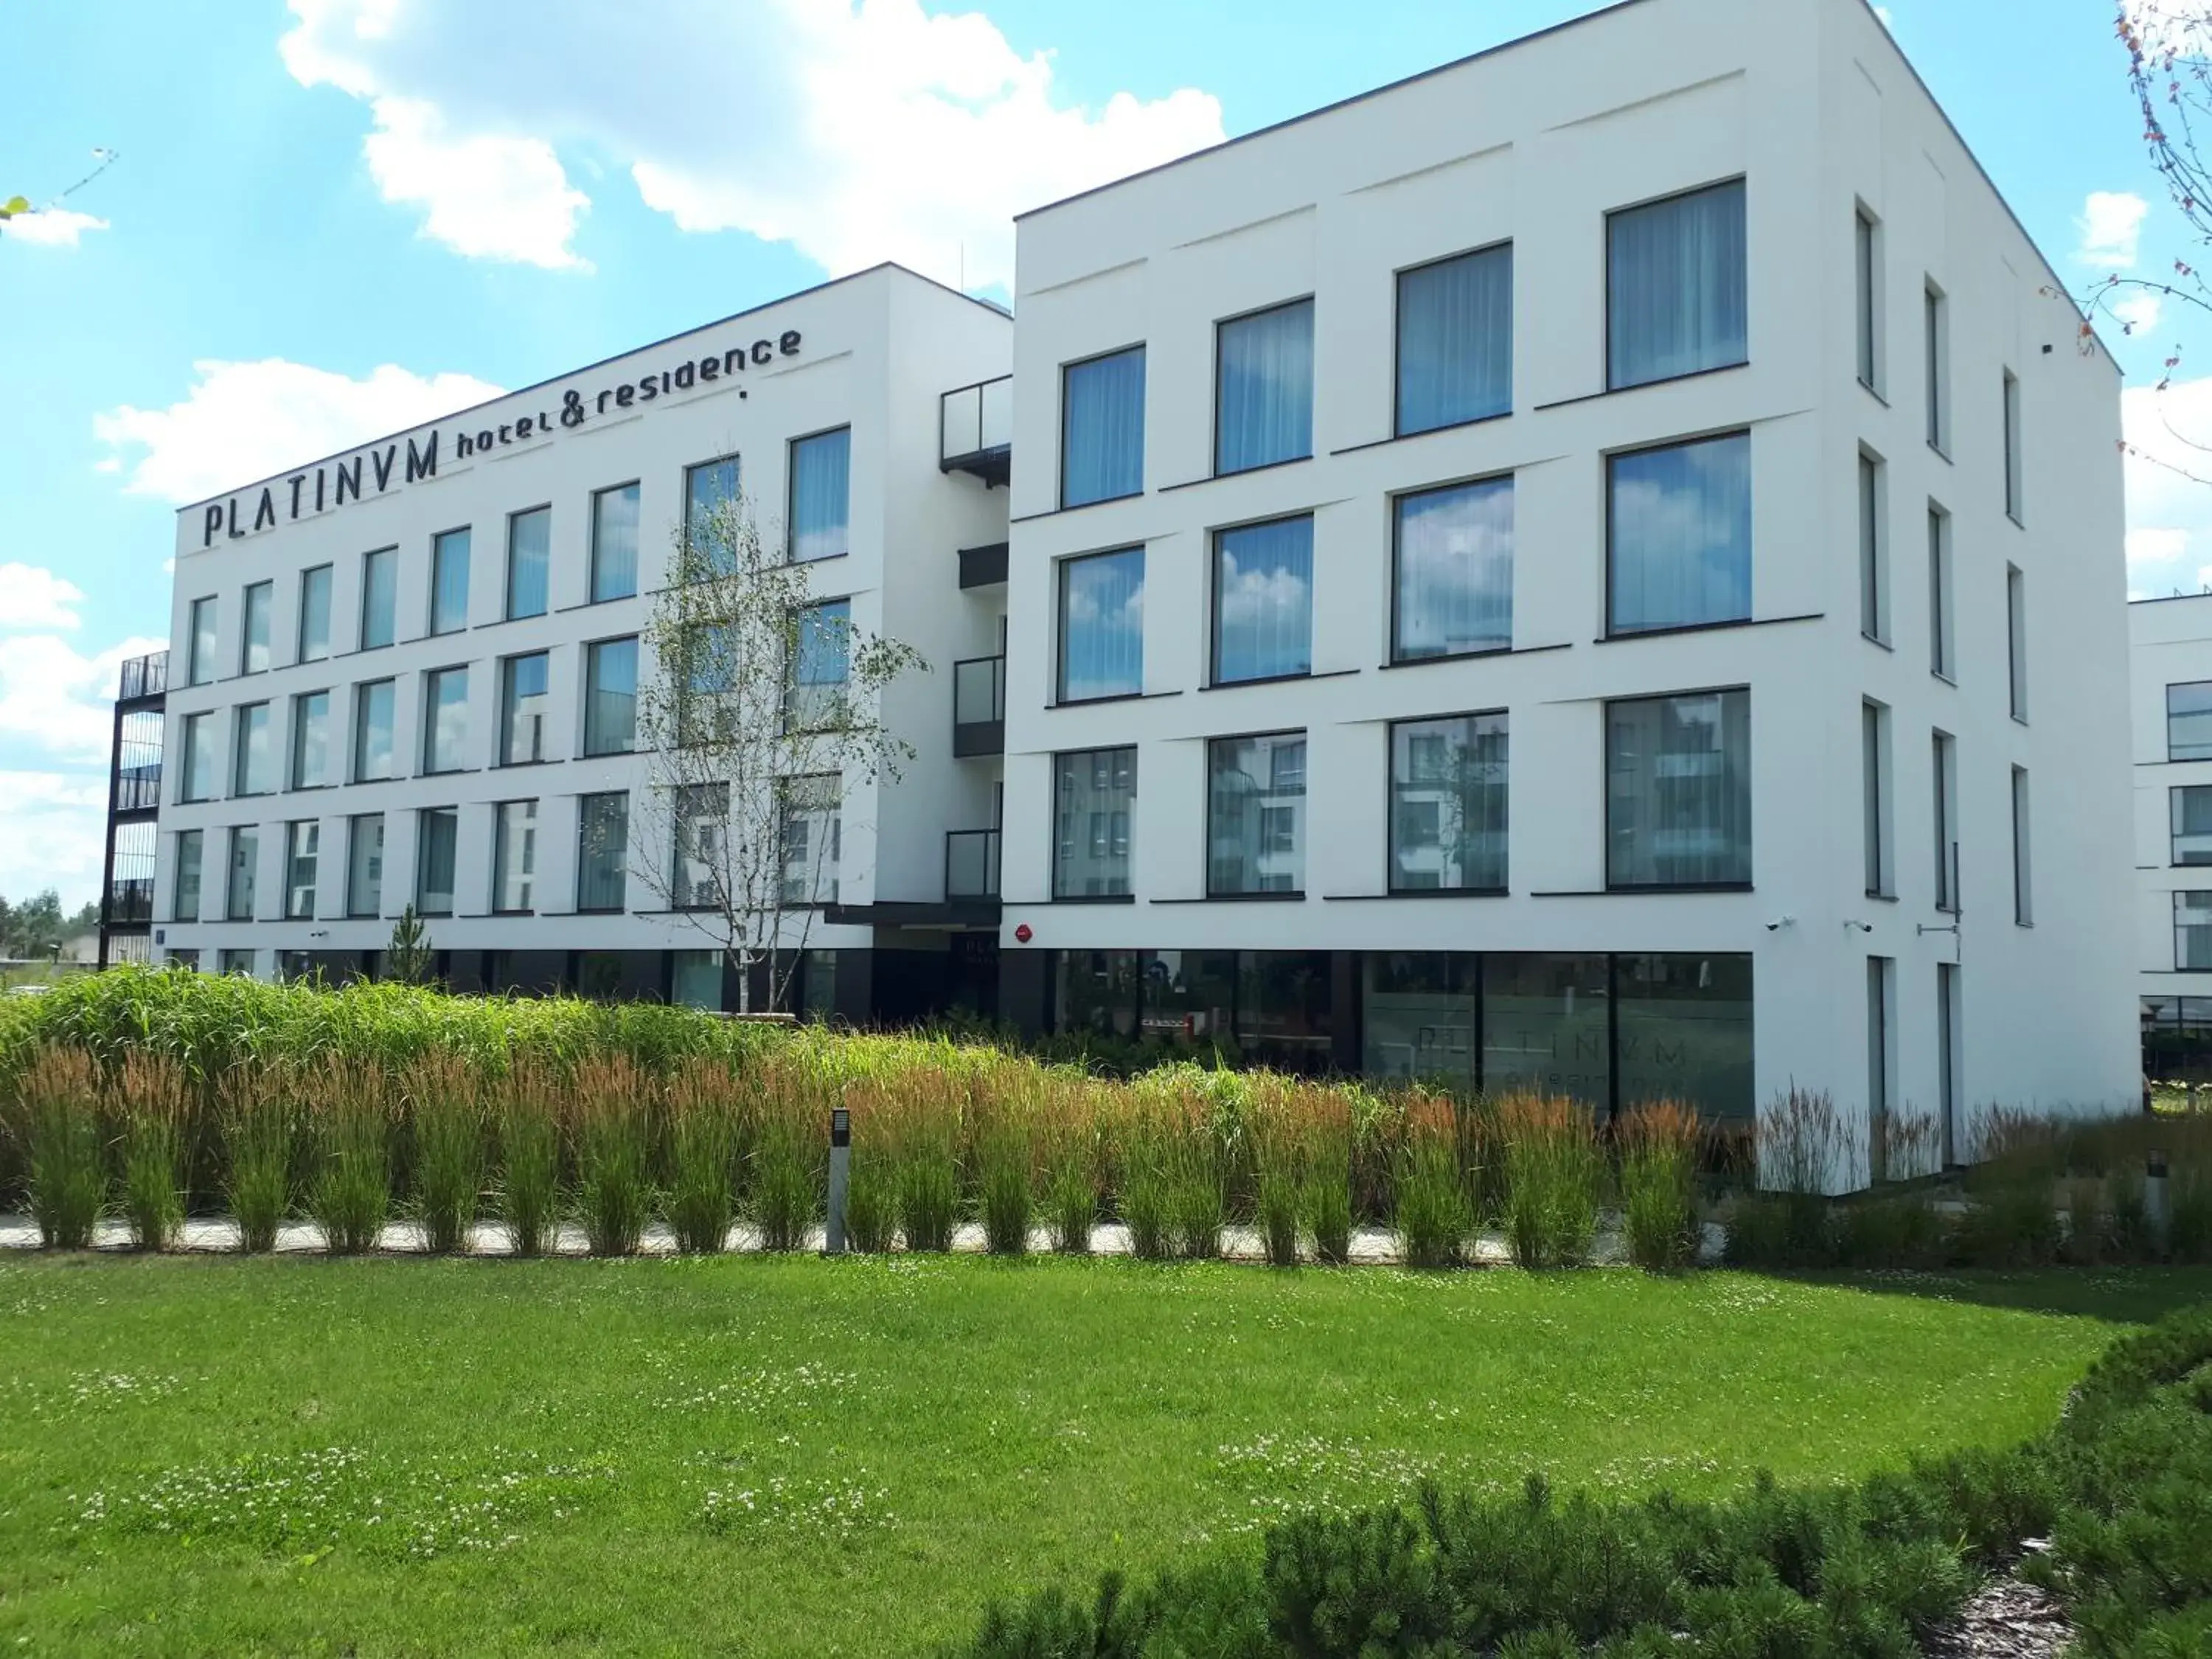 Property Building in Platinum Hotel&Residence Wilanów